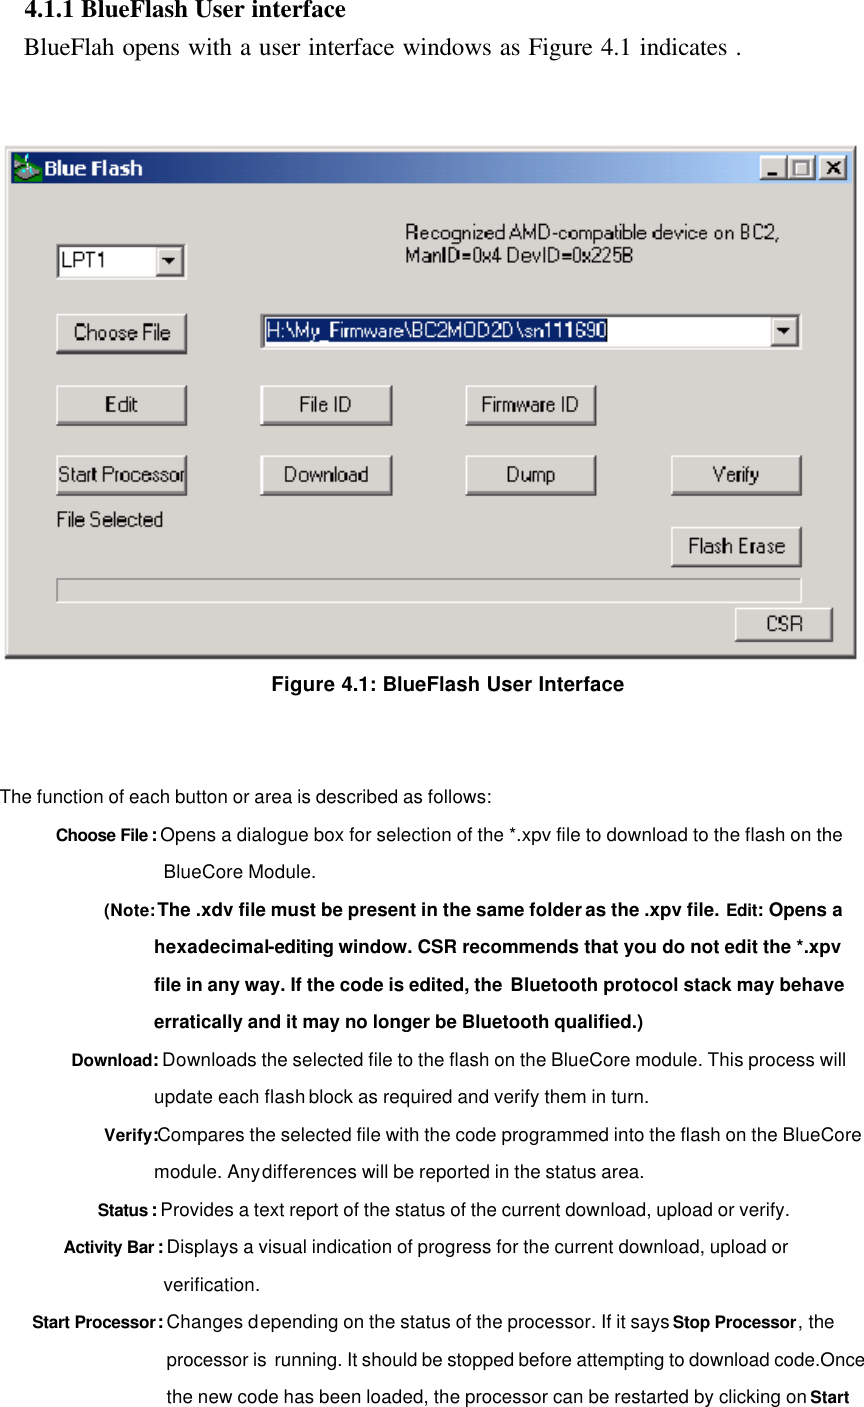   4.1.1 BlueFlash User interface      BlueFlah opens with a user interface windows as Figure 4.1 indicates .    Figure 4.1: BlueFlash User Interface   The function of each button or area is described as follows: Choose File : Opens a dialogue box for selection of the *.xpv file to download to the flash on the BlueCore Module. (Note: The .xdv file must be present in the same folder as the .xpv file. Edit: Opens a hexadecimal-editing window. CSR recommends that you do not edit the *.xpv file in any way. If the code is edited, the Bluetooth protocol stack may behave erratically and it may no longer be Bluetooth qualified.) Download: Downloads the selected file to the flash on the BlueCore module. This process will update each flash block as required and verify them in turn. Verify:Compares the selected file with the code programmed into the flash on the BlueCore module. Any differences will be reported in the status area. Status : Provides a text report of the status of the current download, upload or verify. Activity Bar : Displays a visual indication of progress for the current download, upload or verification. Start Processor: Changes depending on the status of the processor. If it says Stop Processor, the processor is  running. It should be stopped before attempting to download code.Once the new code has been loaded, the processor can be restarted by clicking on Start 